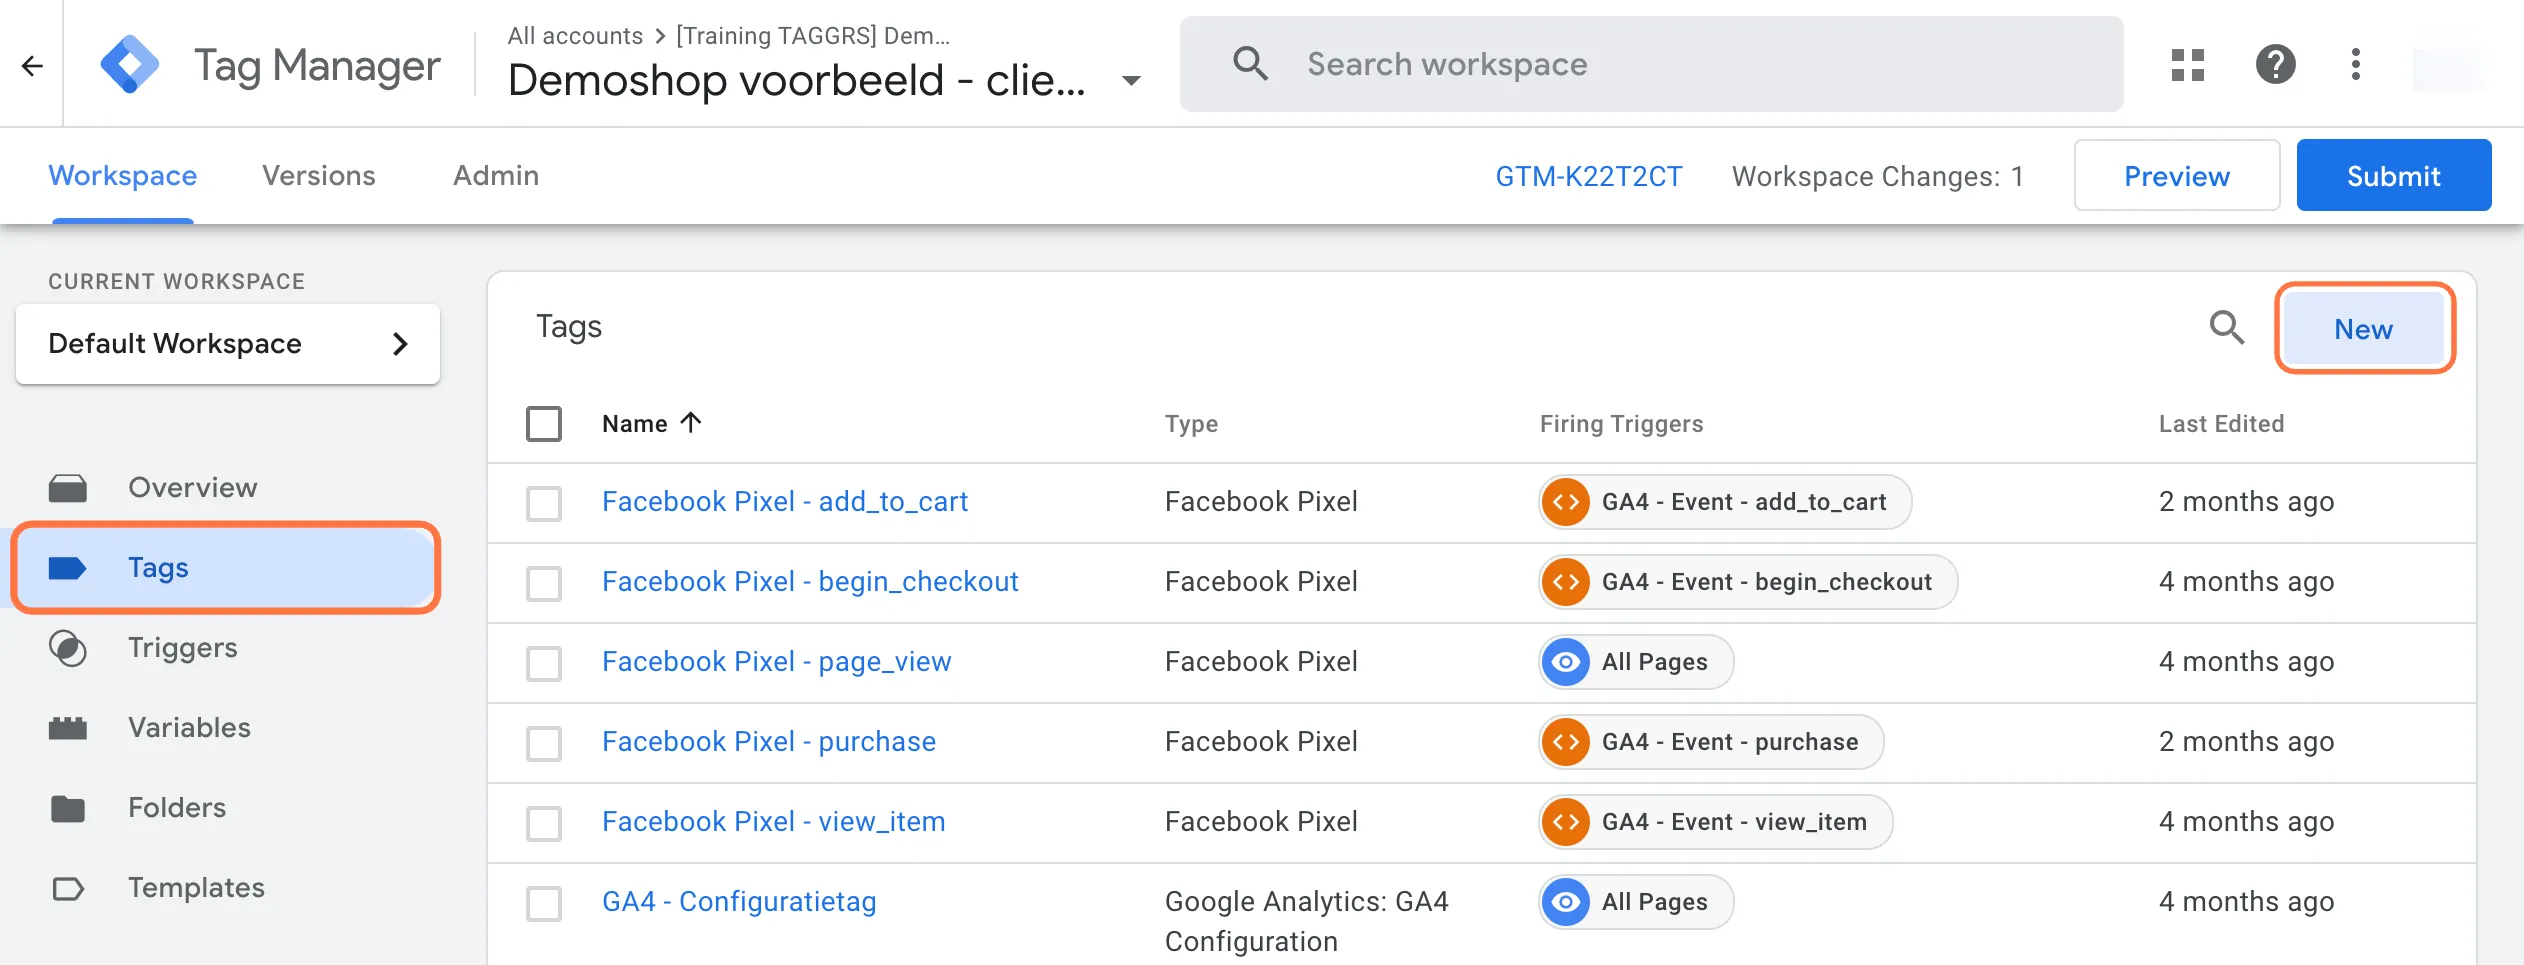 workspace-google-tag-manager-client-side-tags